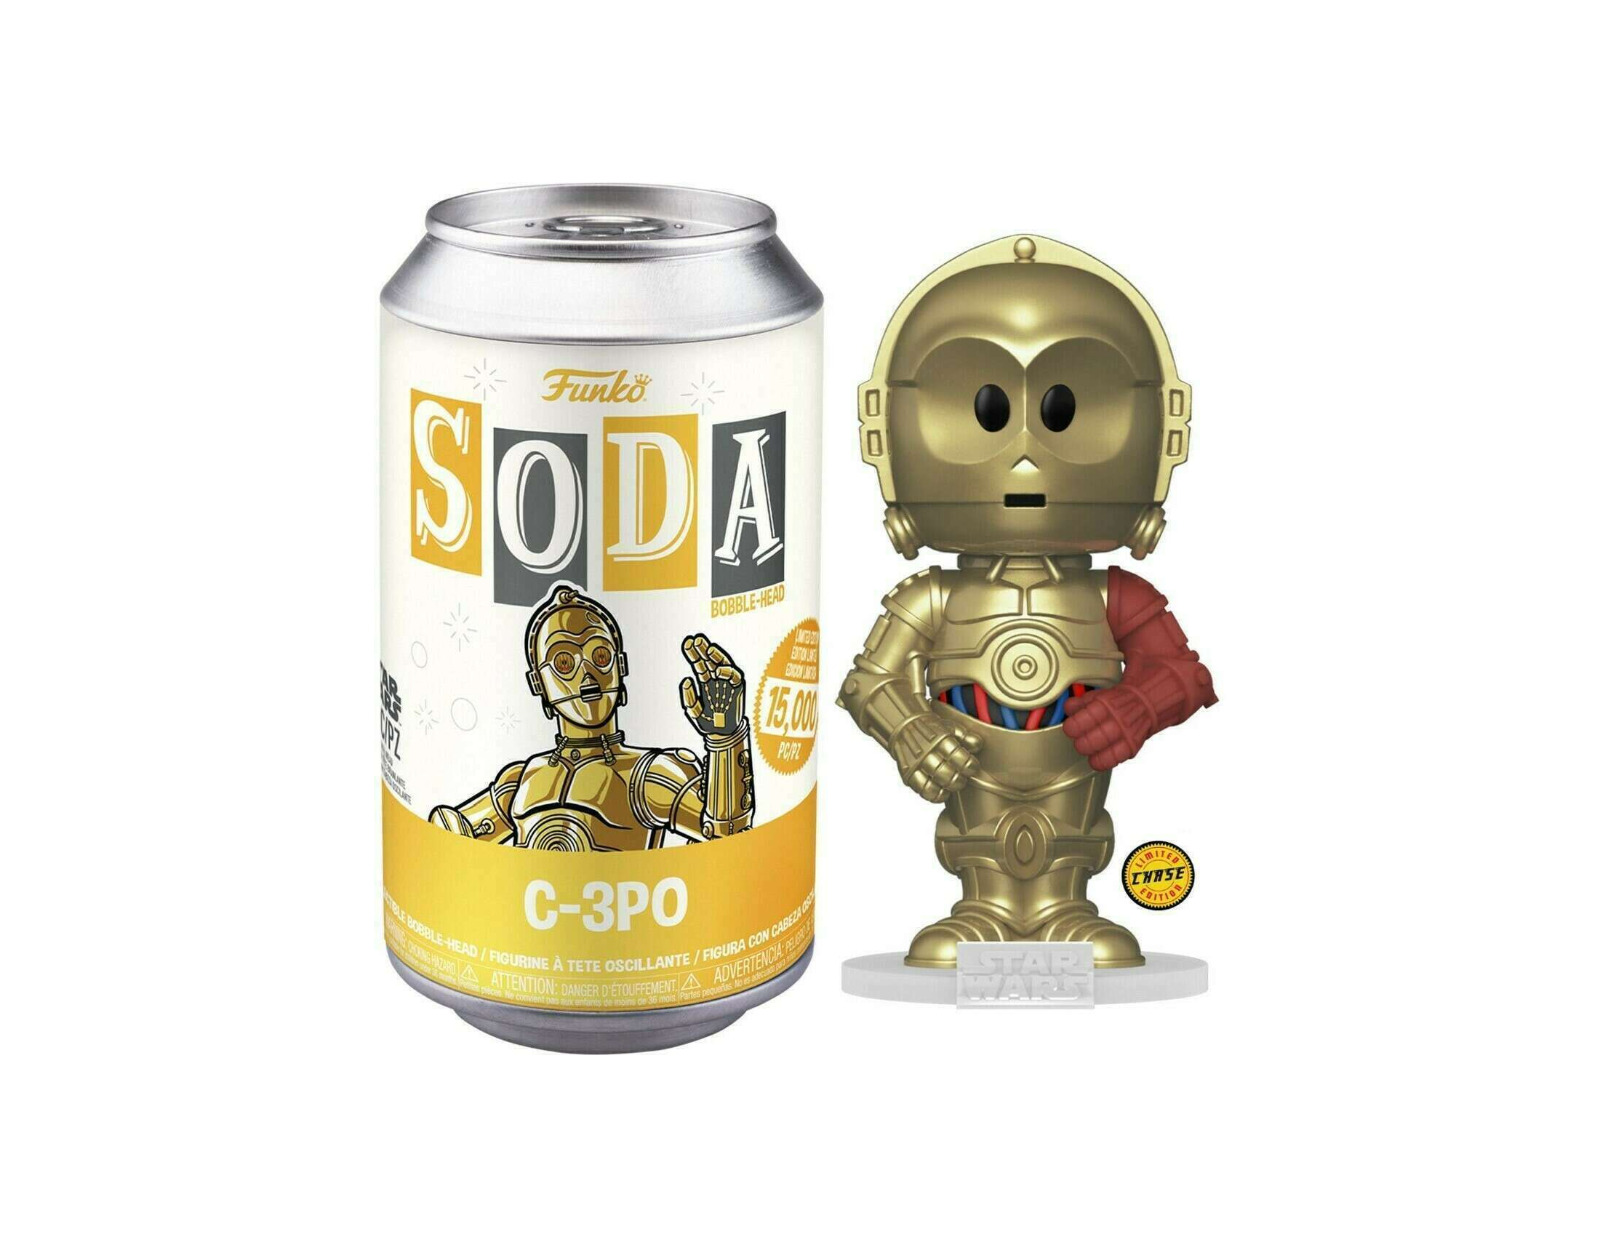 Funko Soda Star Wars - C-3PO (Chase & Common) Limited 15,000 (Opened)